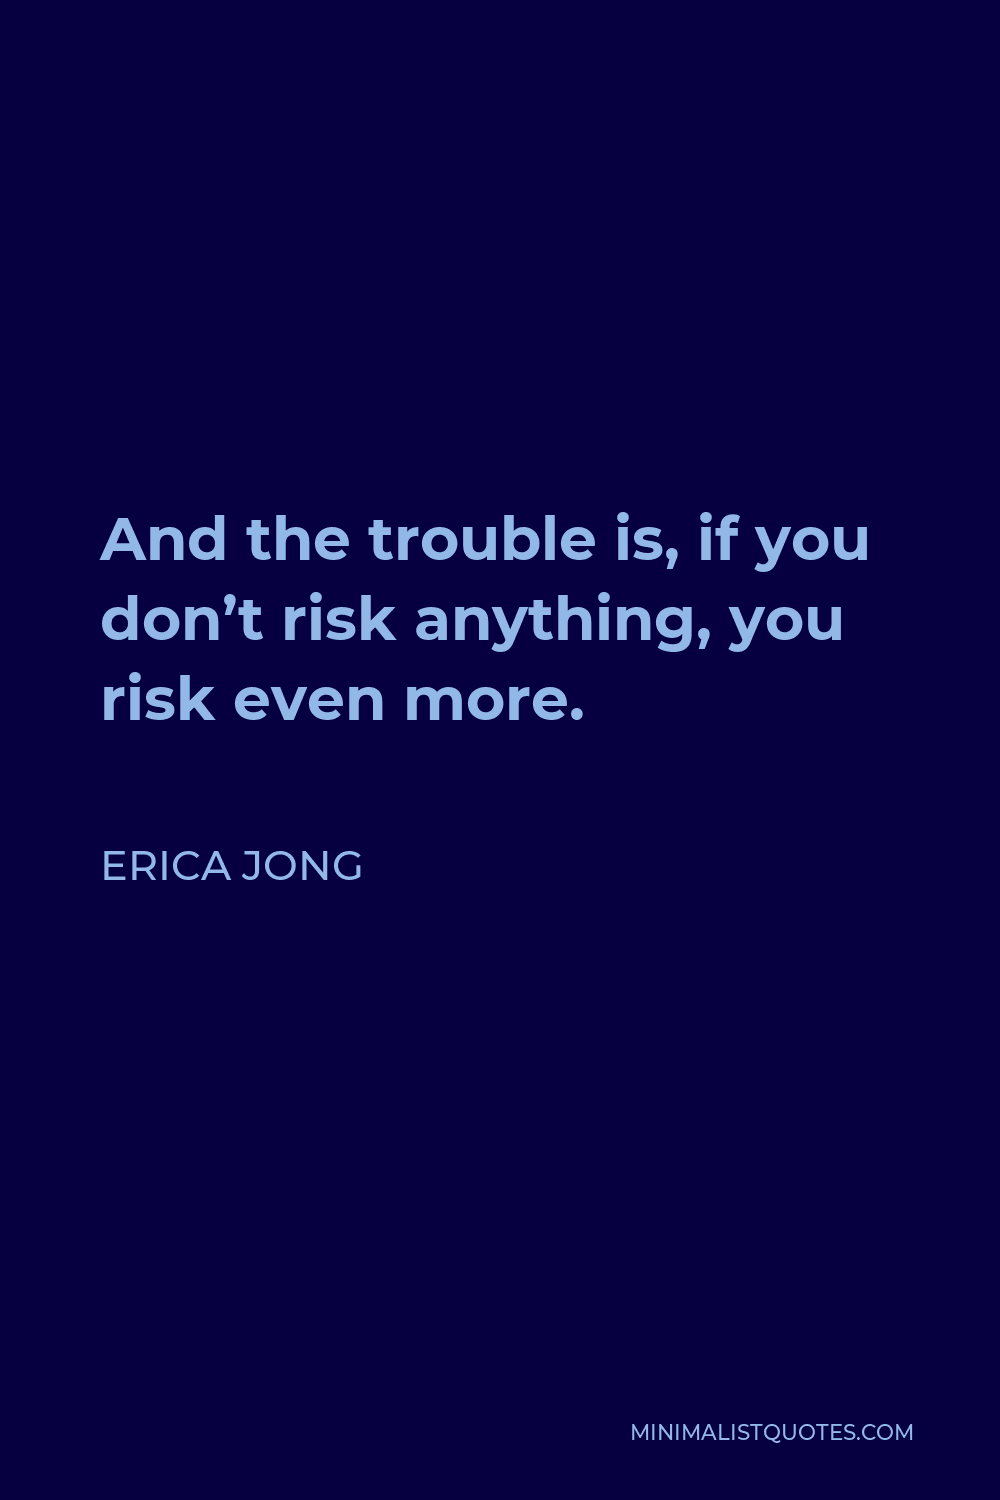 Erica Jong Quote - And the trouble is, if you don’t risk anything, you risk even more.